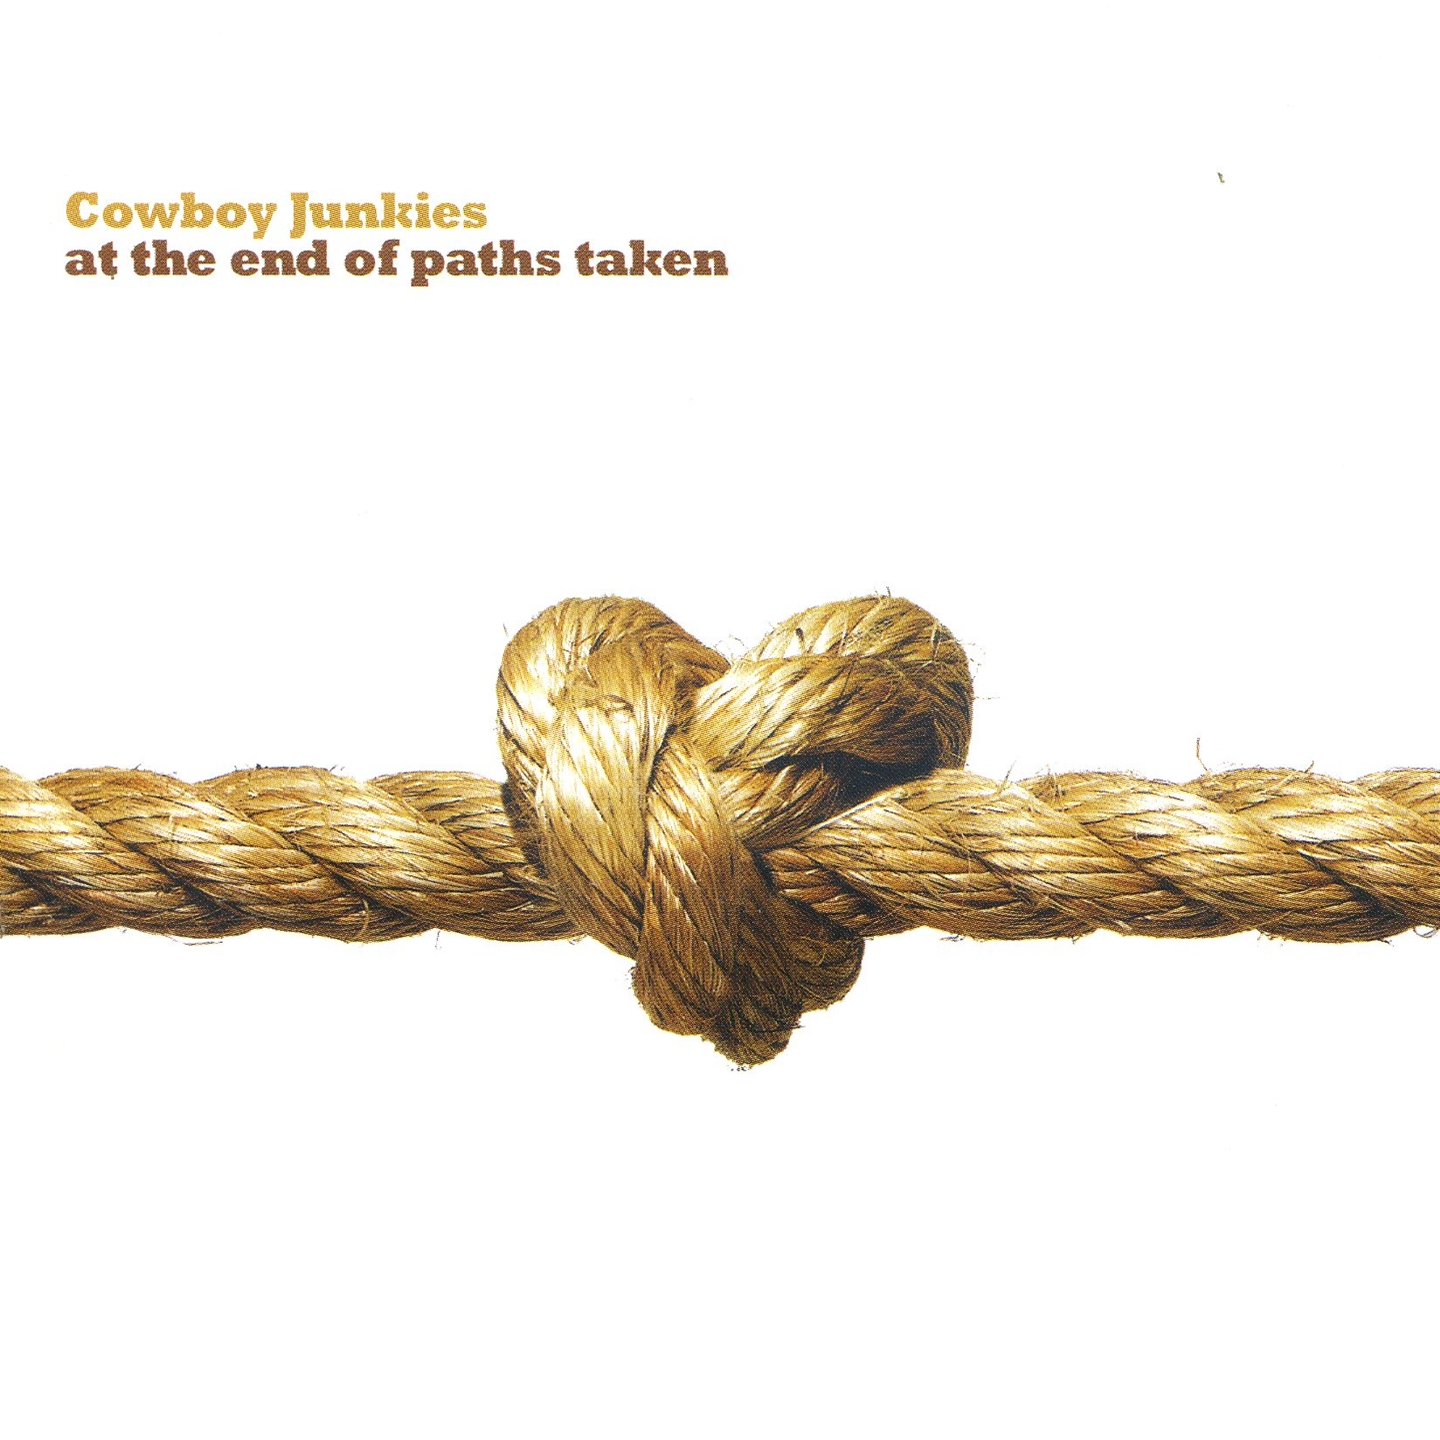 AT THE END OF PATHS TAKEN